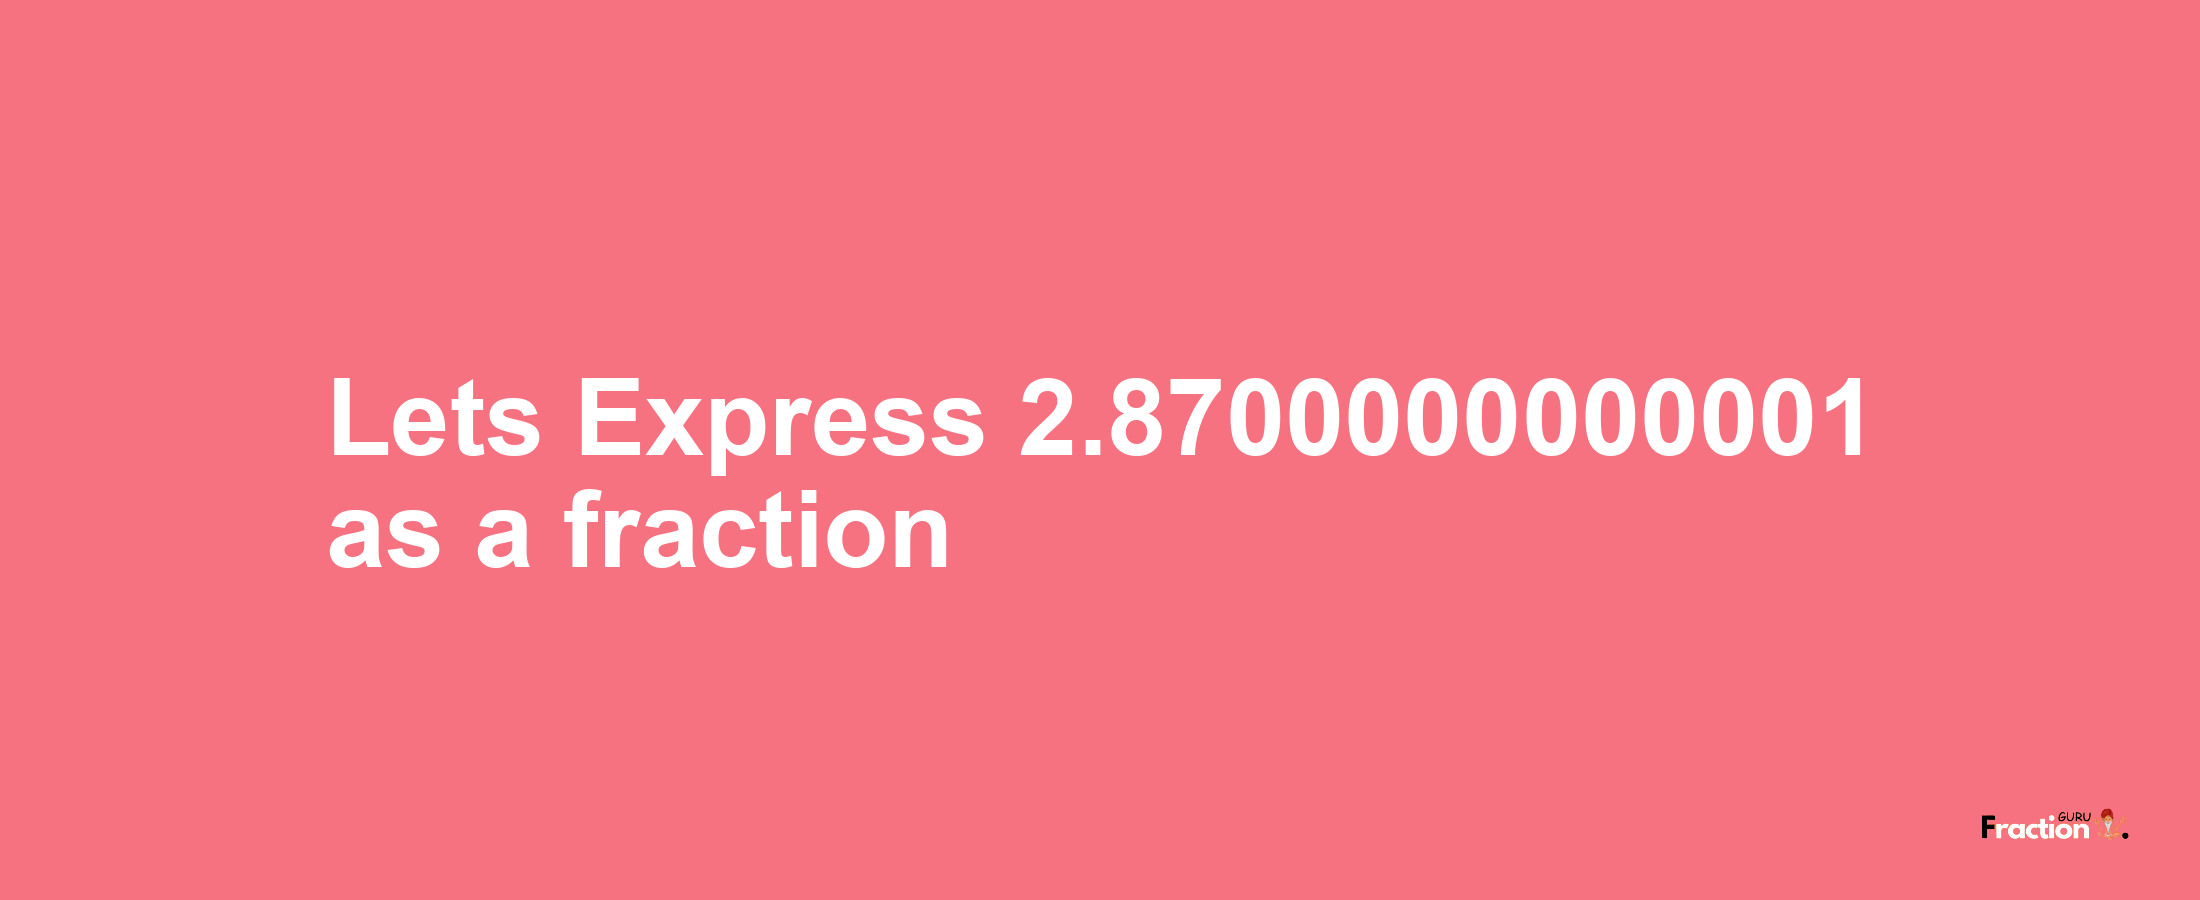 Lets Express 2.8700000000001 as afraction